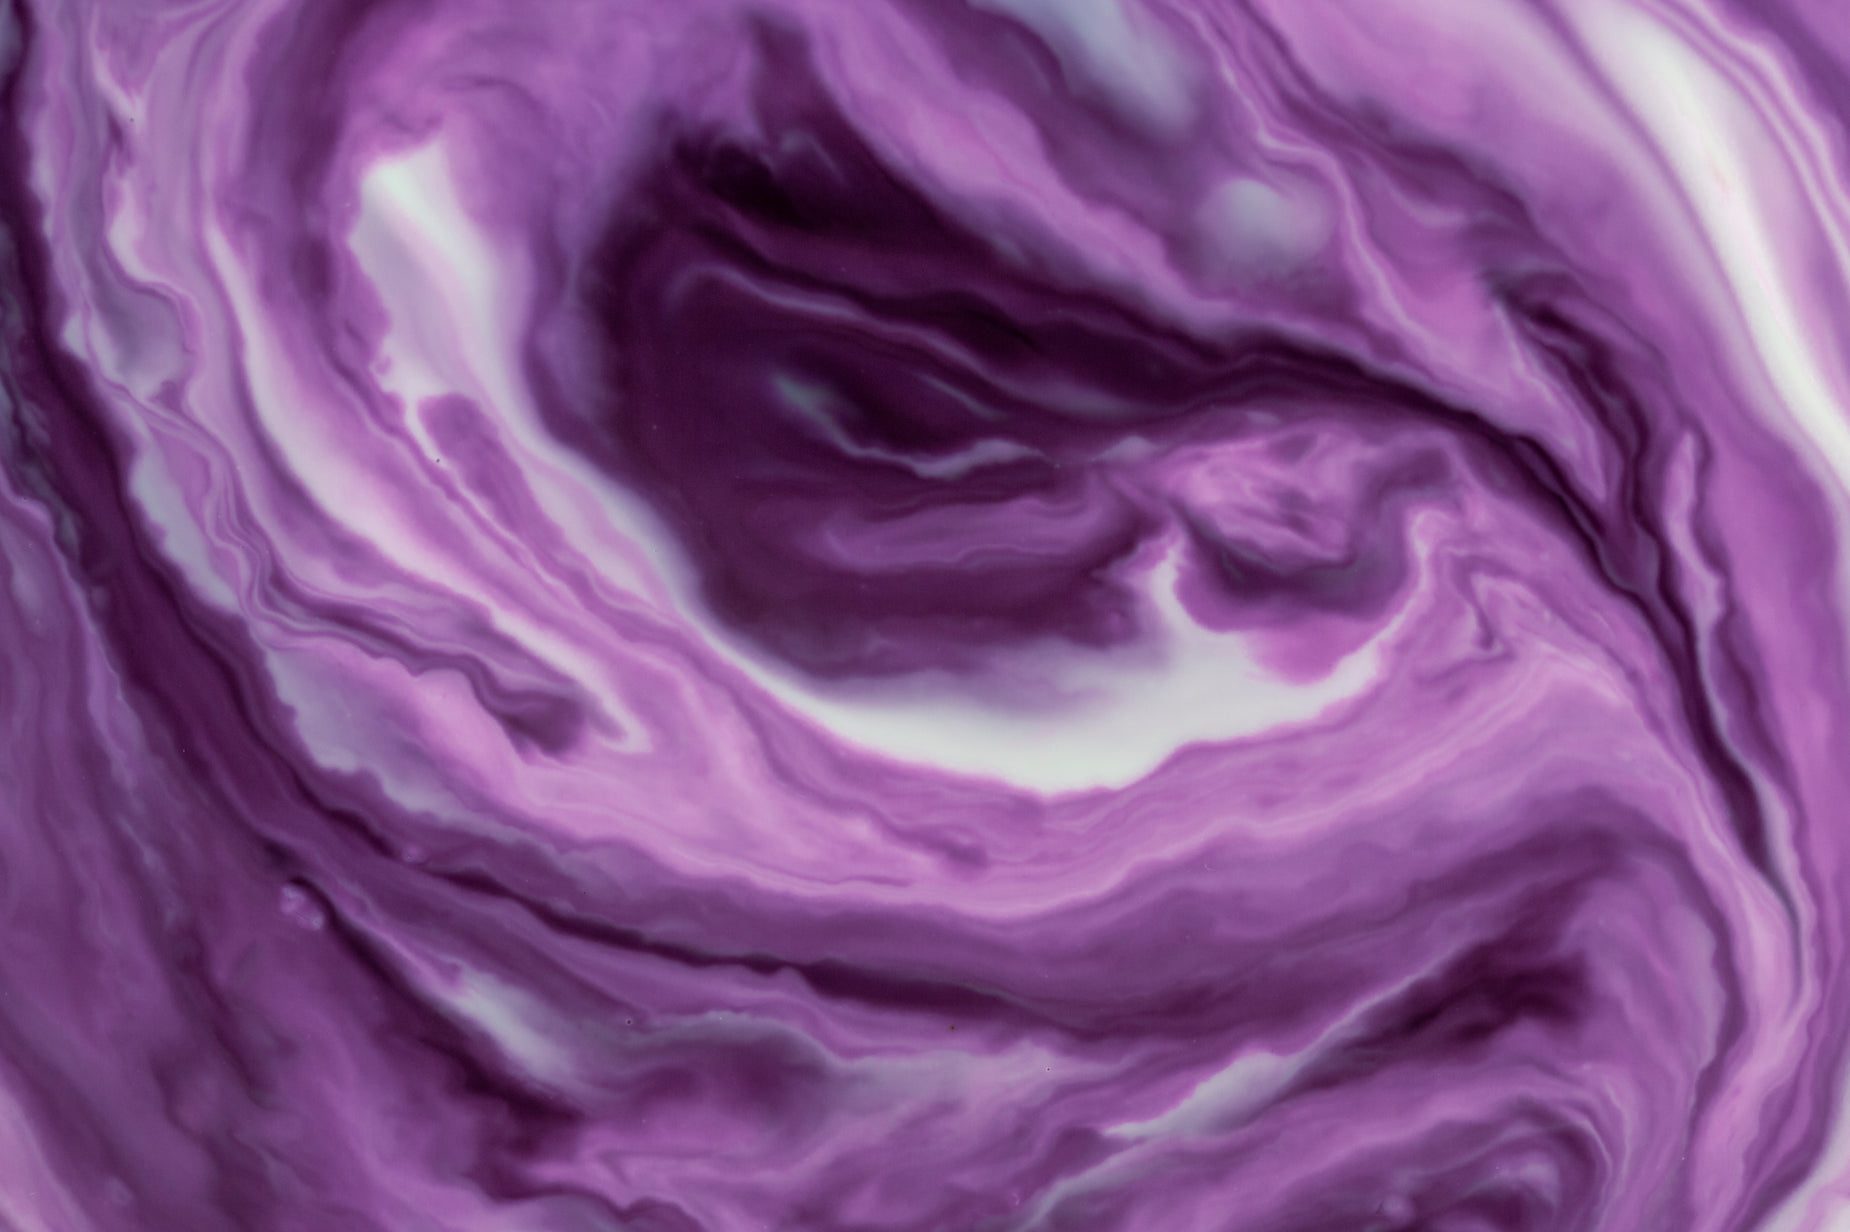 this is an abstract painting of purple and white